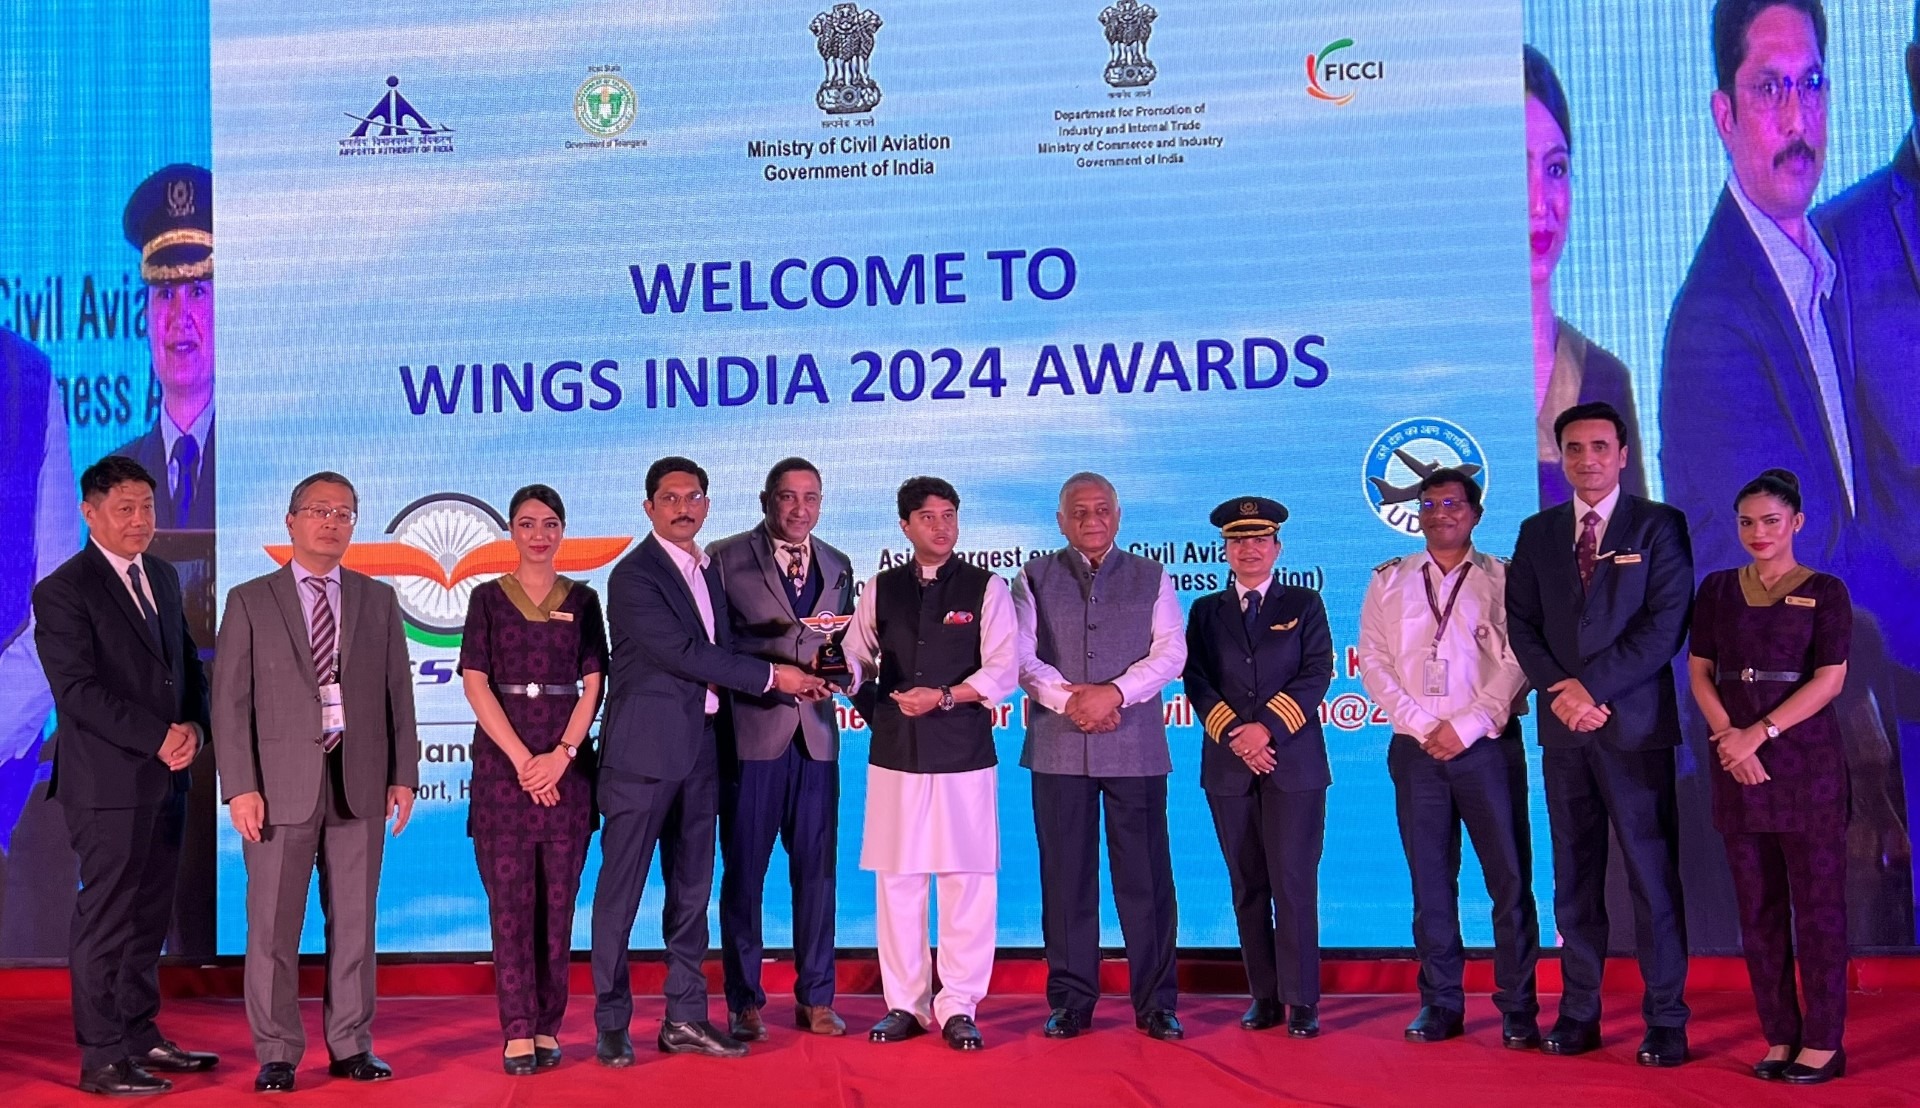 VISTARA NAMED BEST AIRLINE OF THE YEAR AT WINGS INDIA 2024